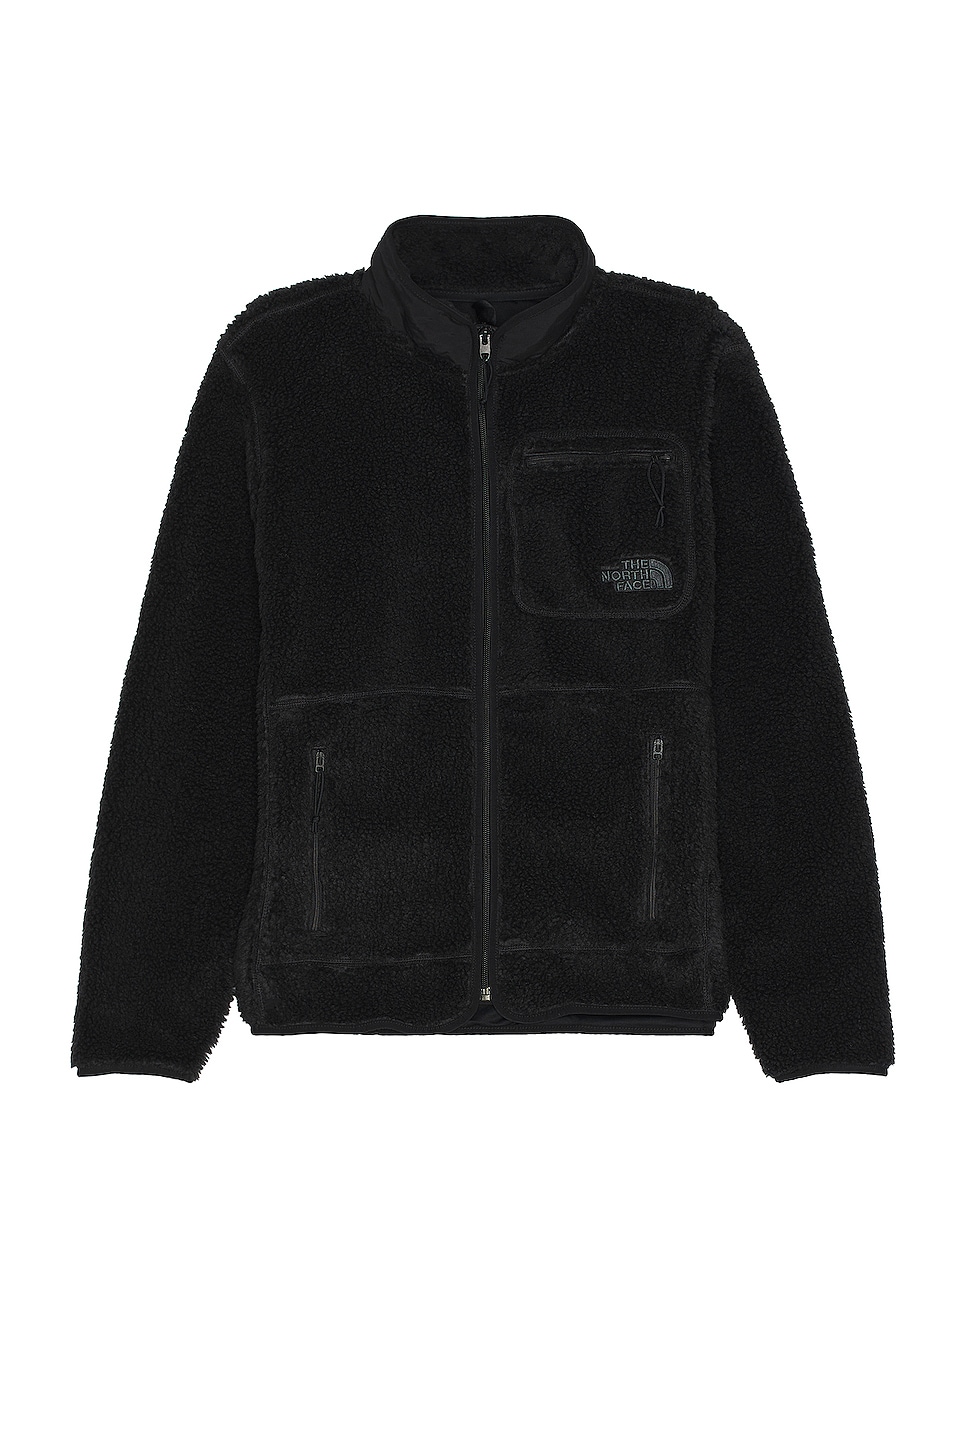 Image 1 of The North Face Extreme Pile Full Zip Jacket in Black